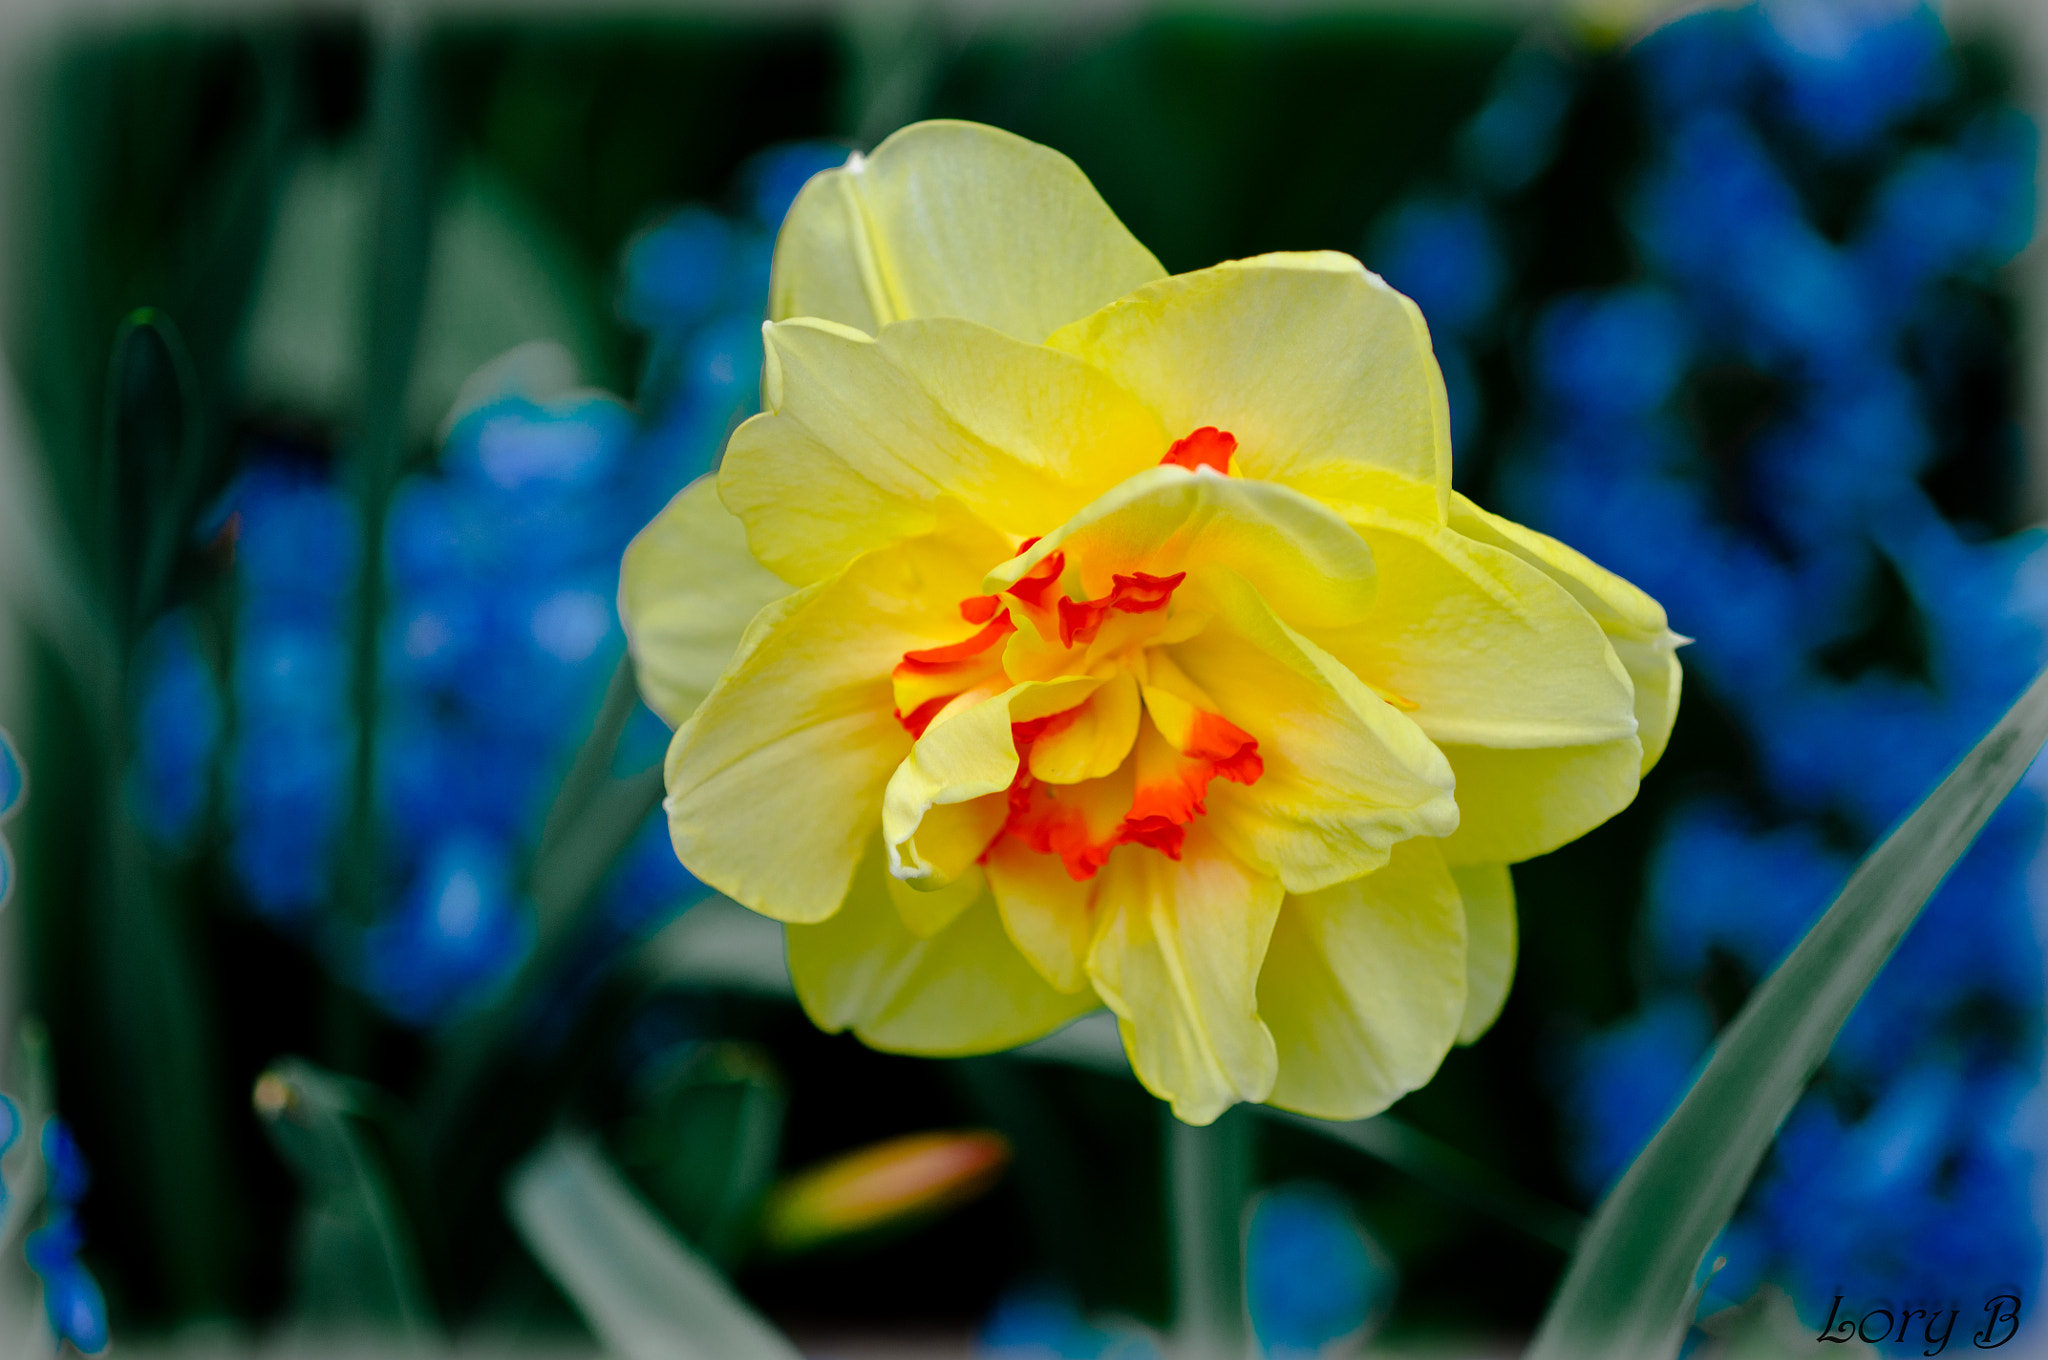 Pentax K-x sample photo. Narcissus photography